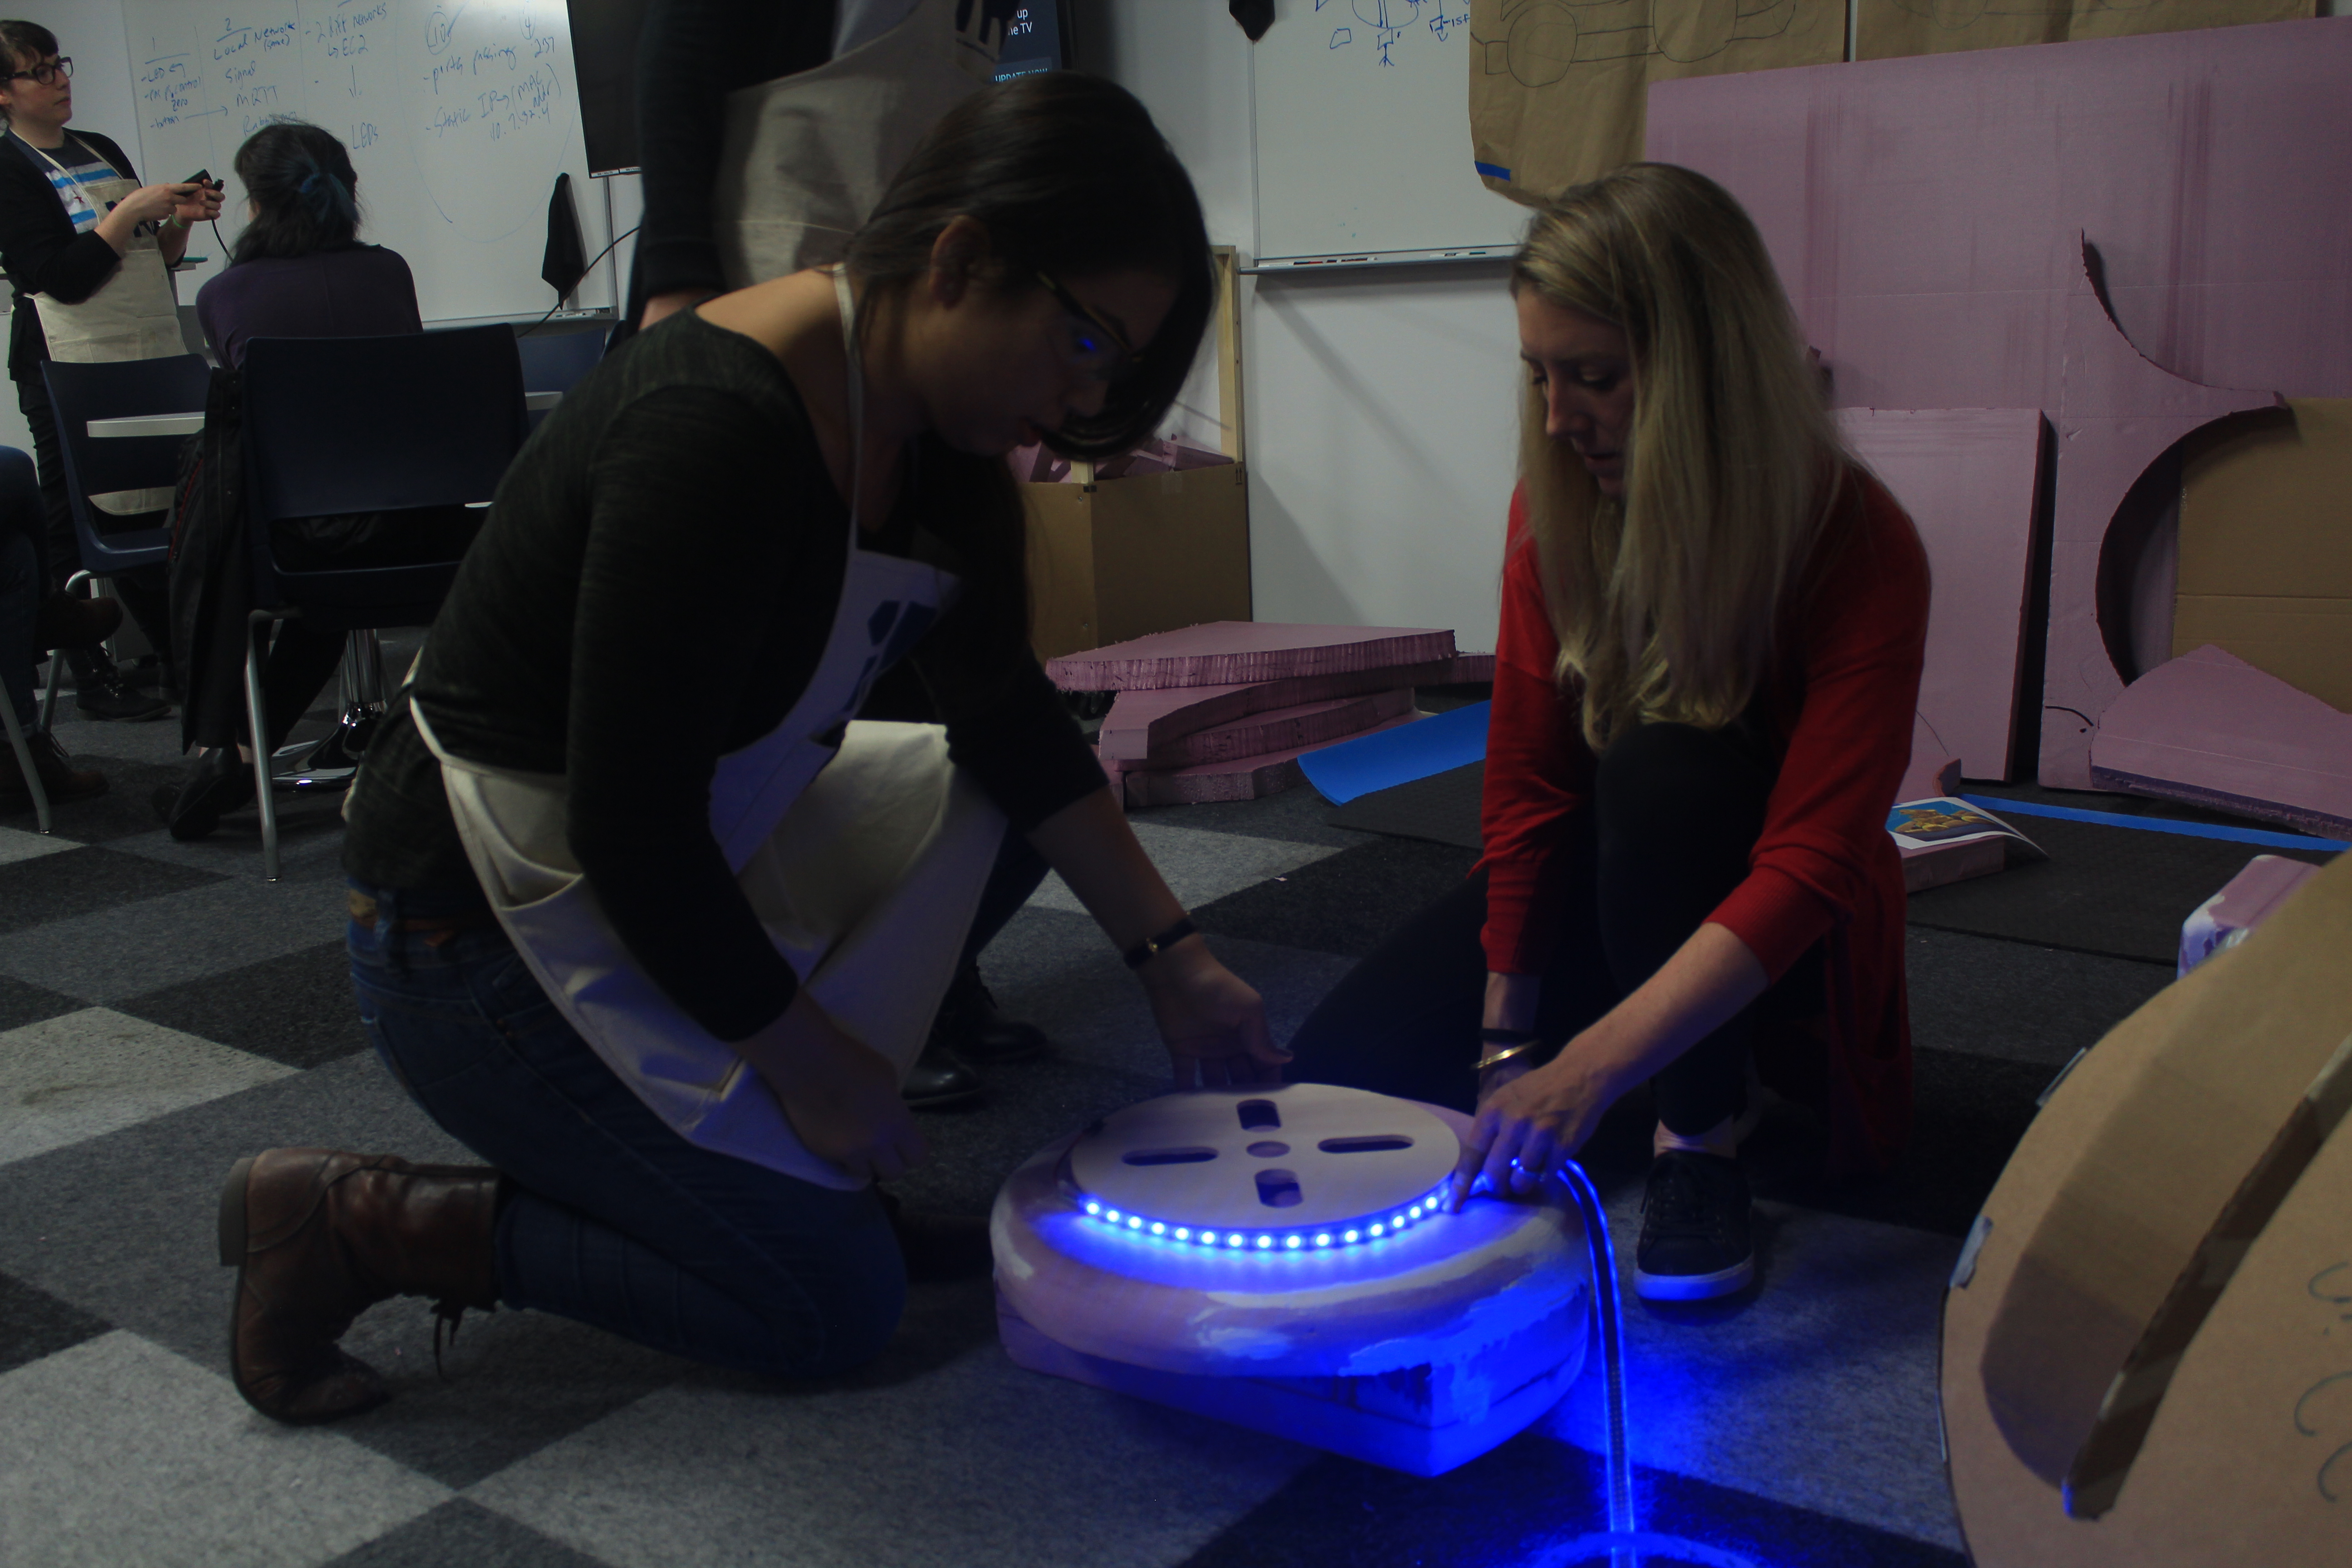 Jennifer Lawhead (left) and LeAnne Wagner (right) test the hubcap and string lights a week before the reveal. (Meredith Melland, 14 East)